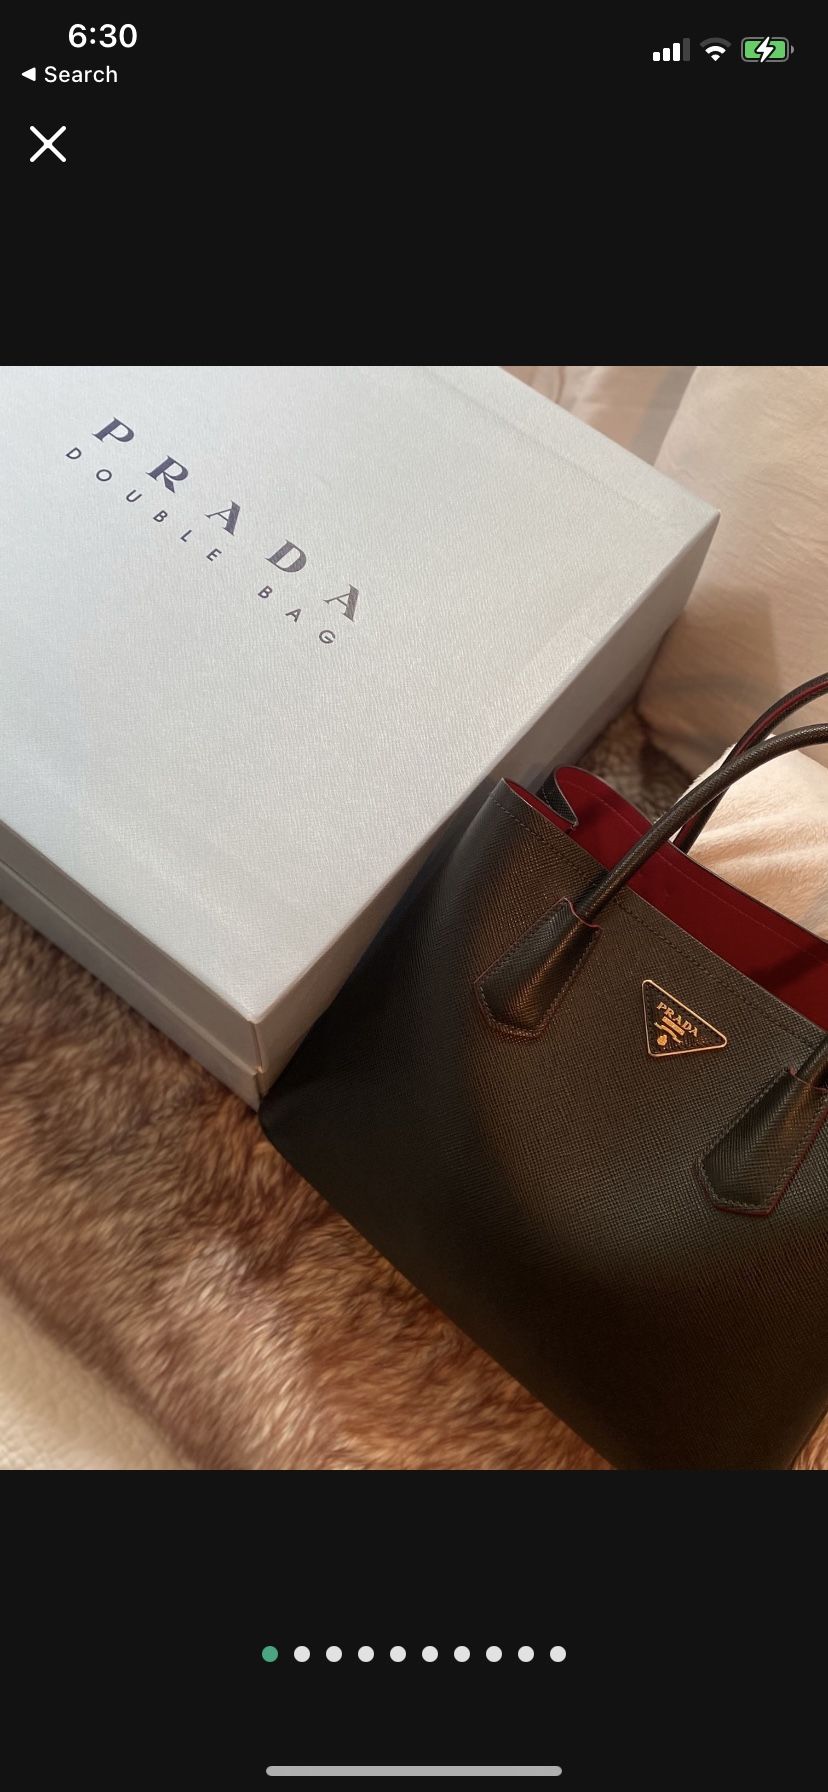 Nearly Brand New - Prada Large Double Bags - With Box, Dust Back And Gift Bag 